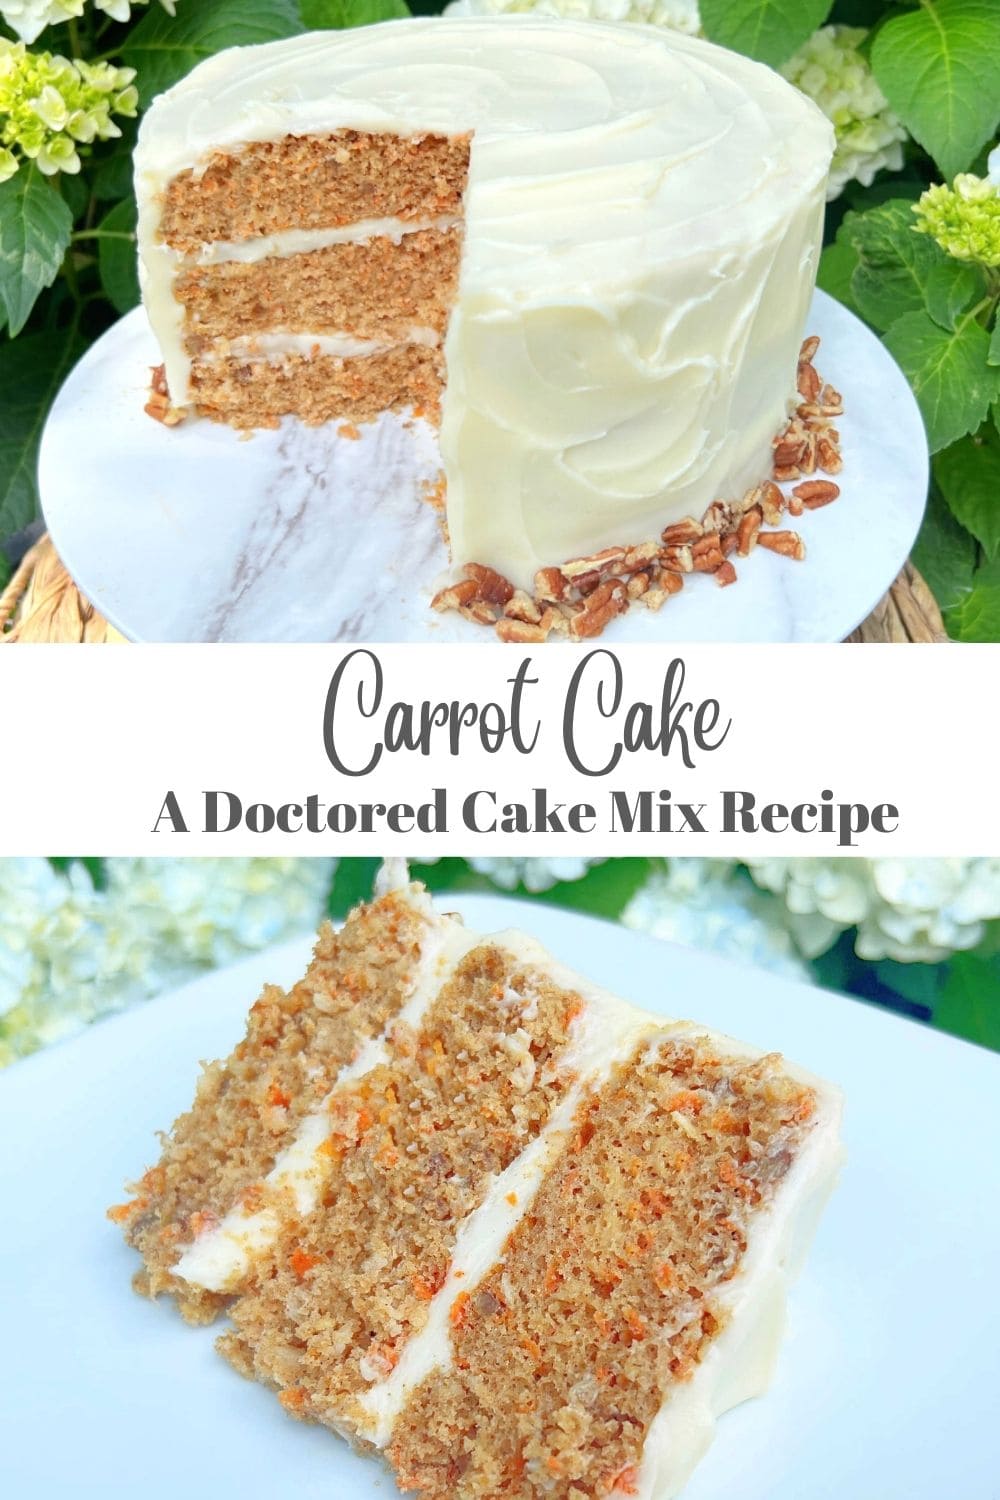 Carrot Cake- A Doctored Cake Mix